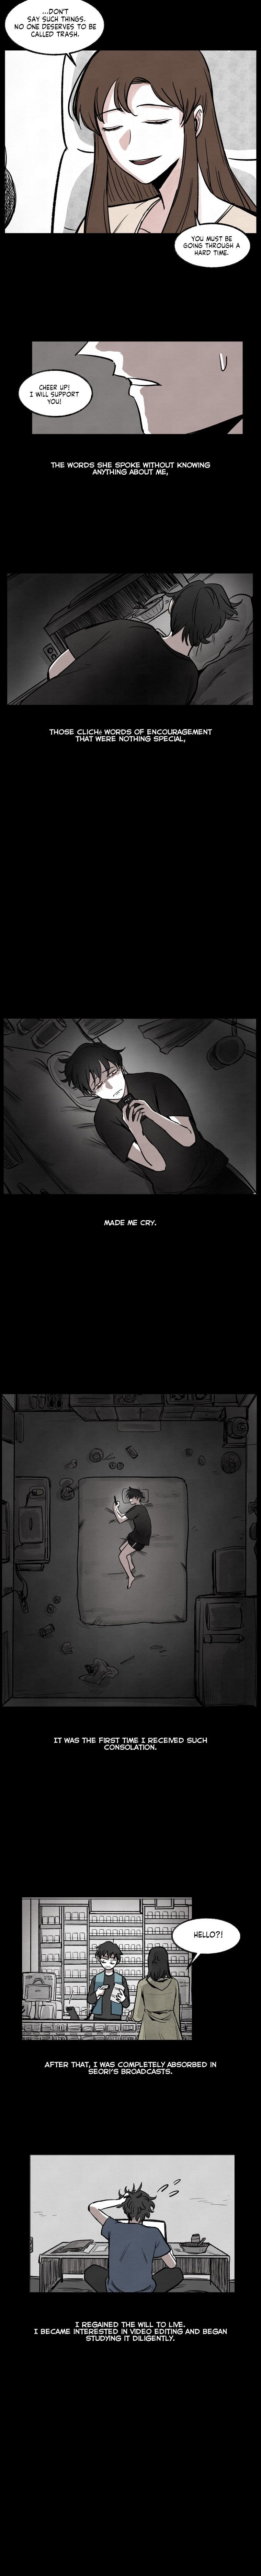 Devil’s Editing Chapter 1 - Page 10